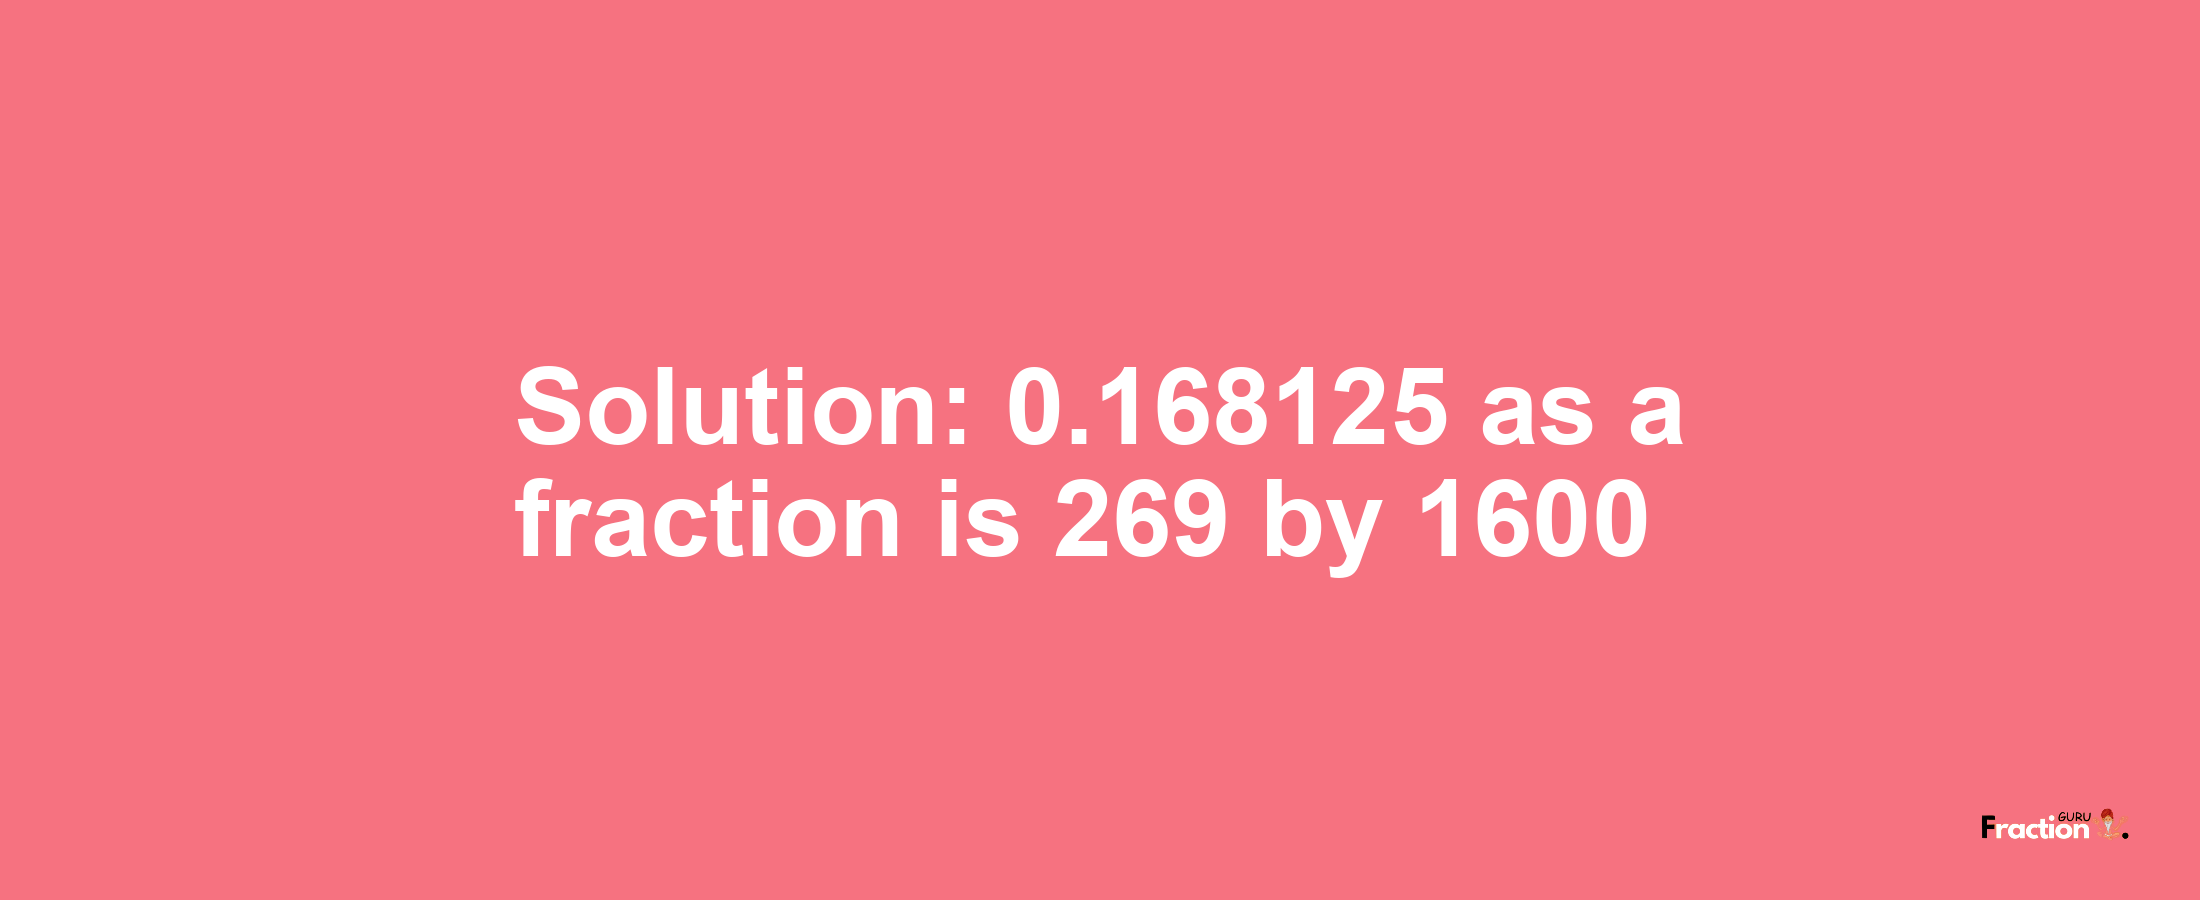 Solution:0.168125 as a fraction is 269/1600